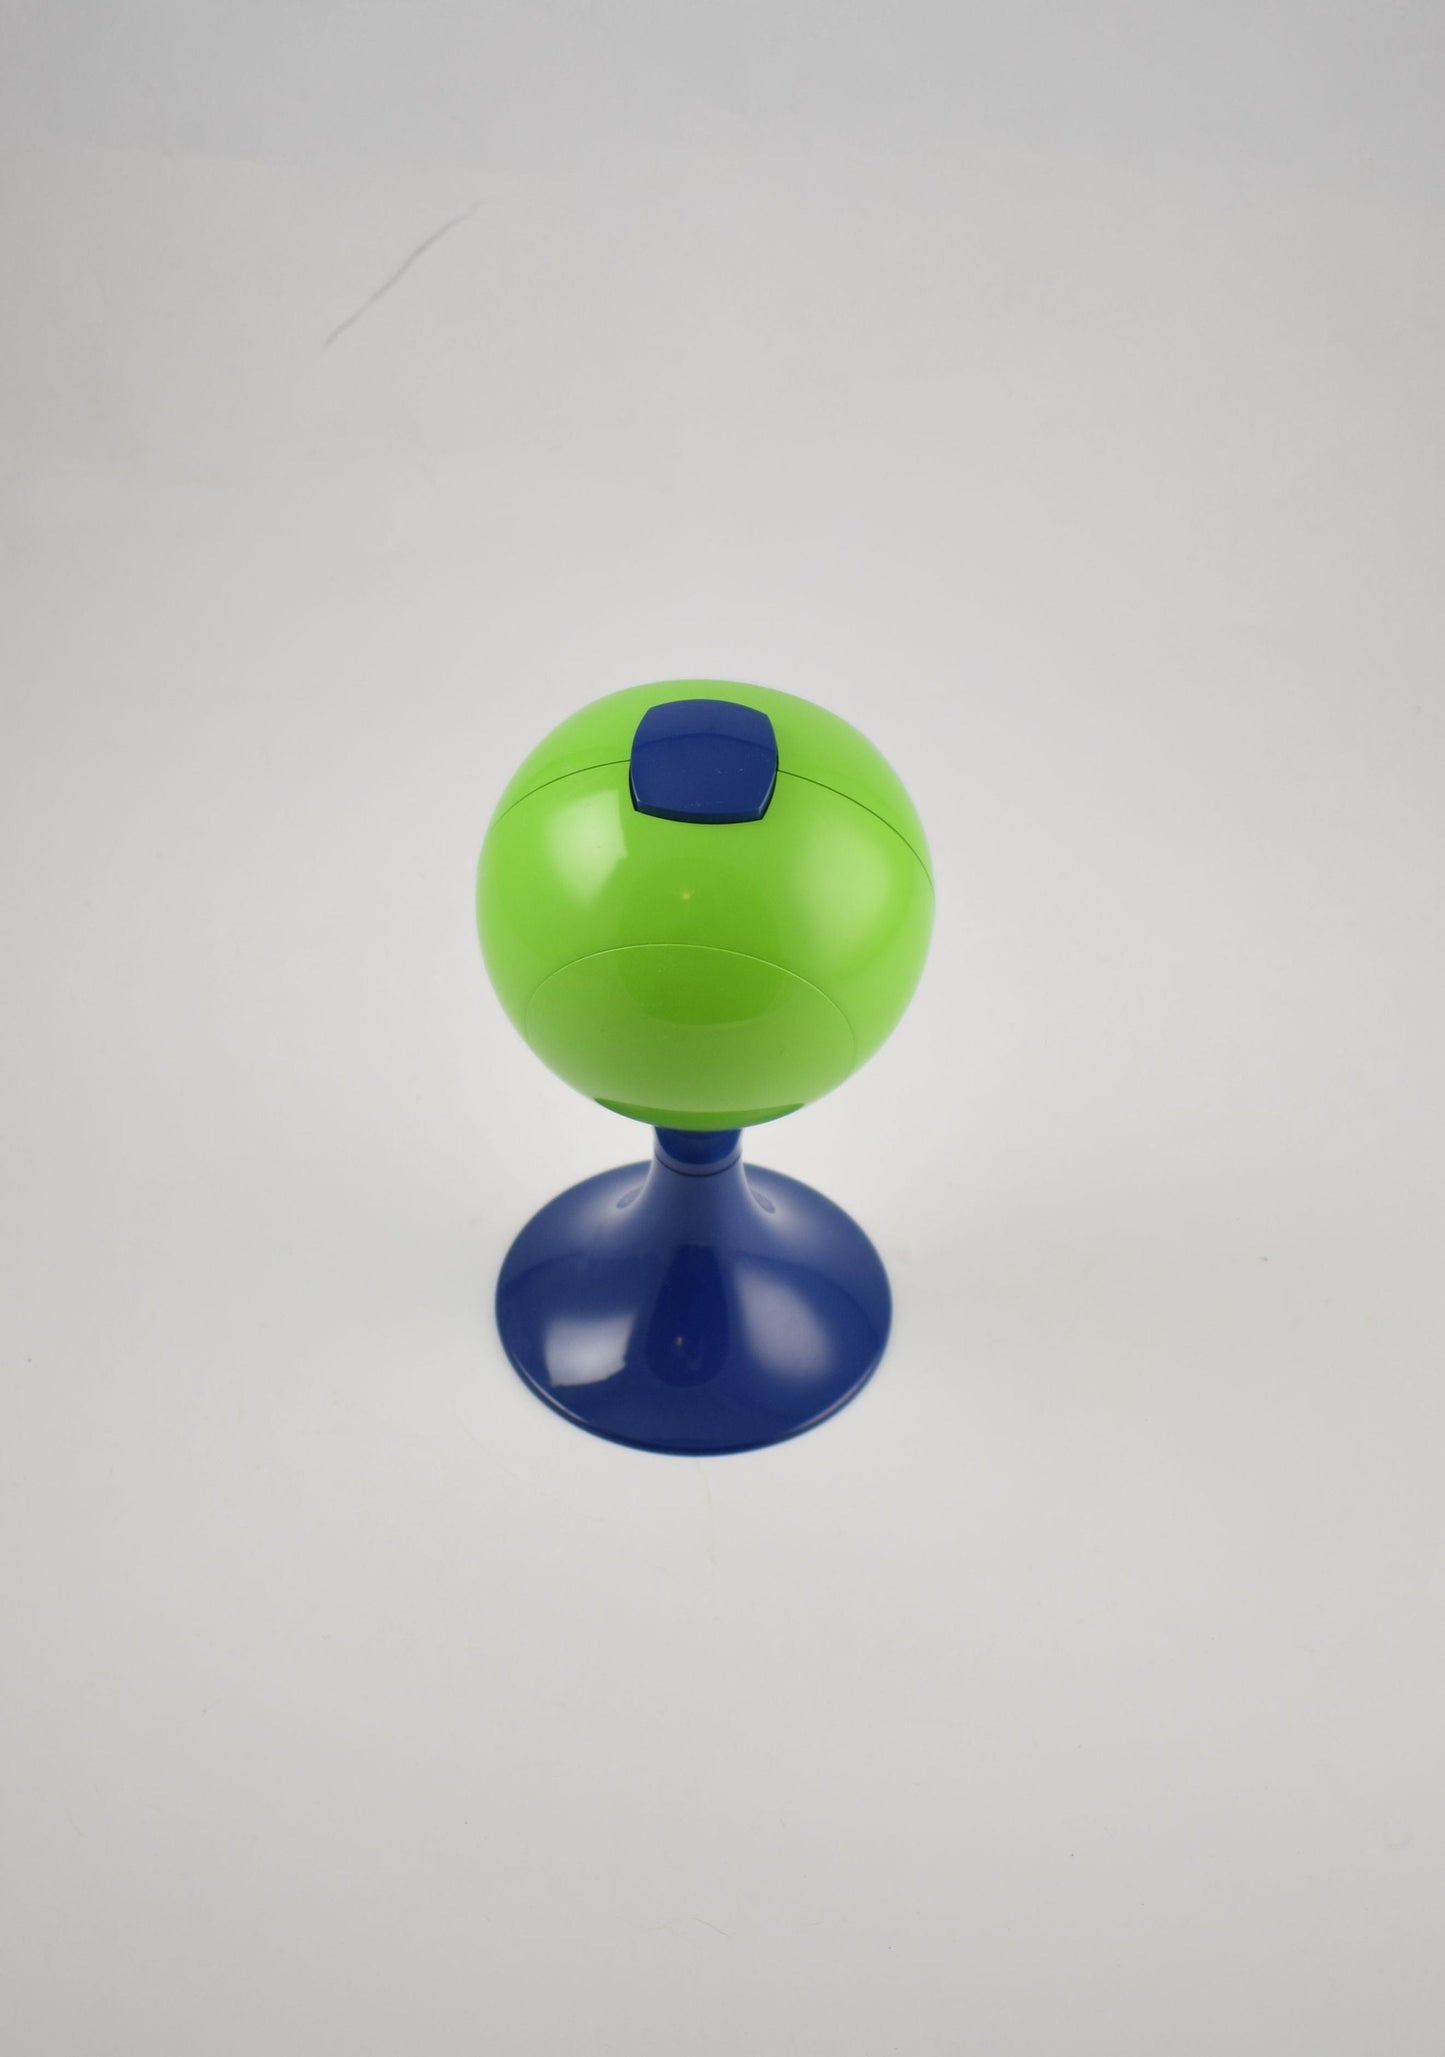 Blessing alarm clock, Light green and blue pedestal tulip shape, made in Germany. Space age era, made of plastic from the early 1970s